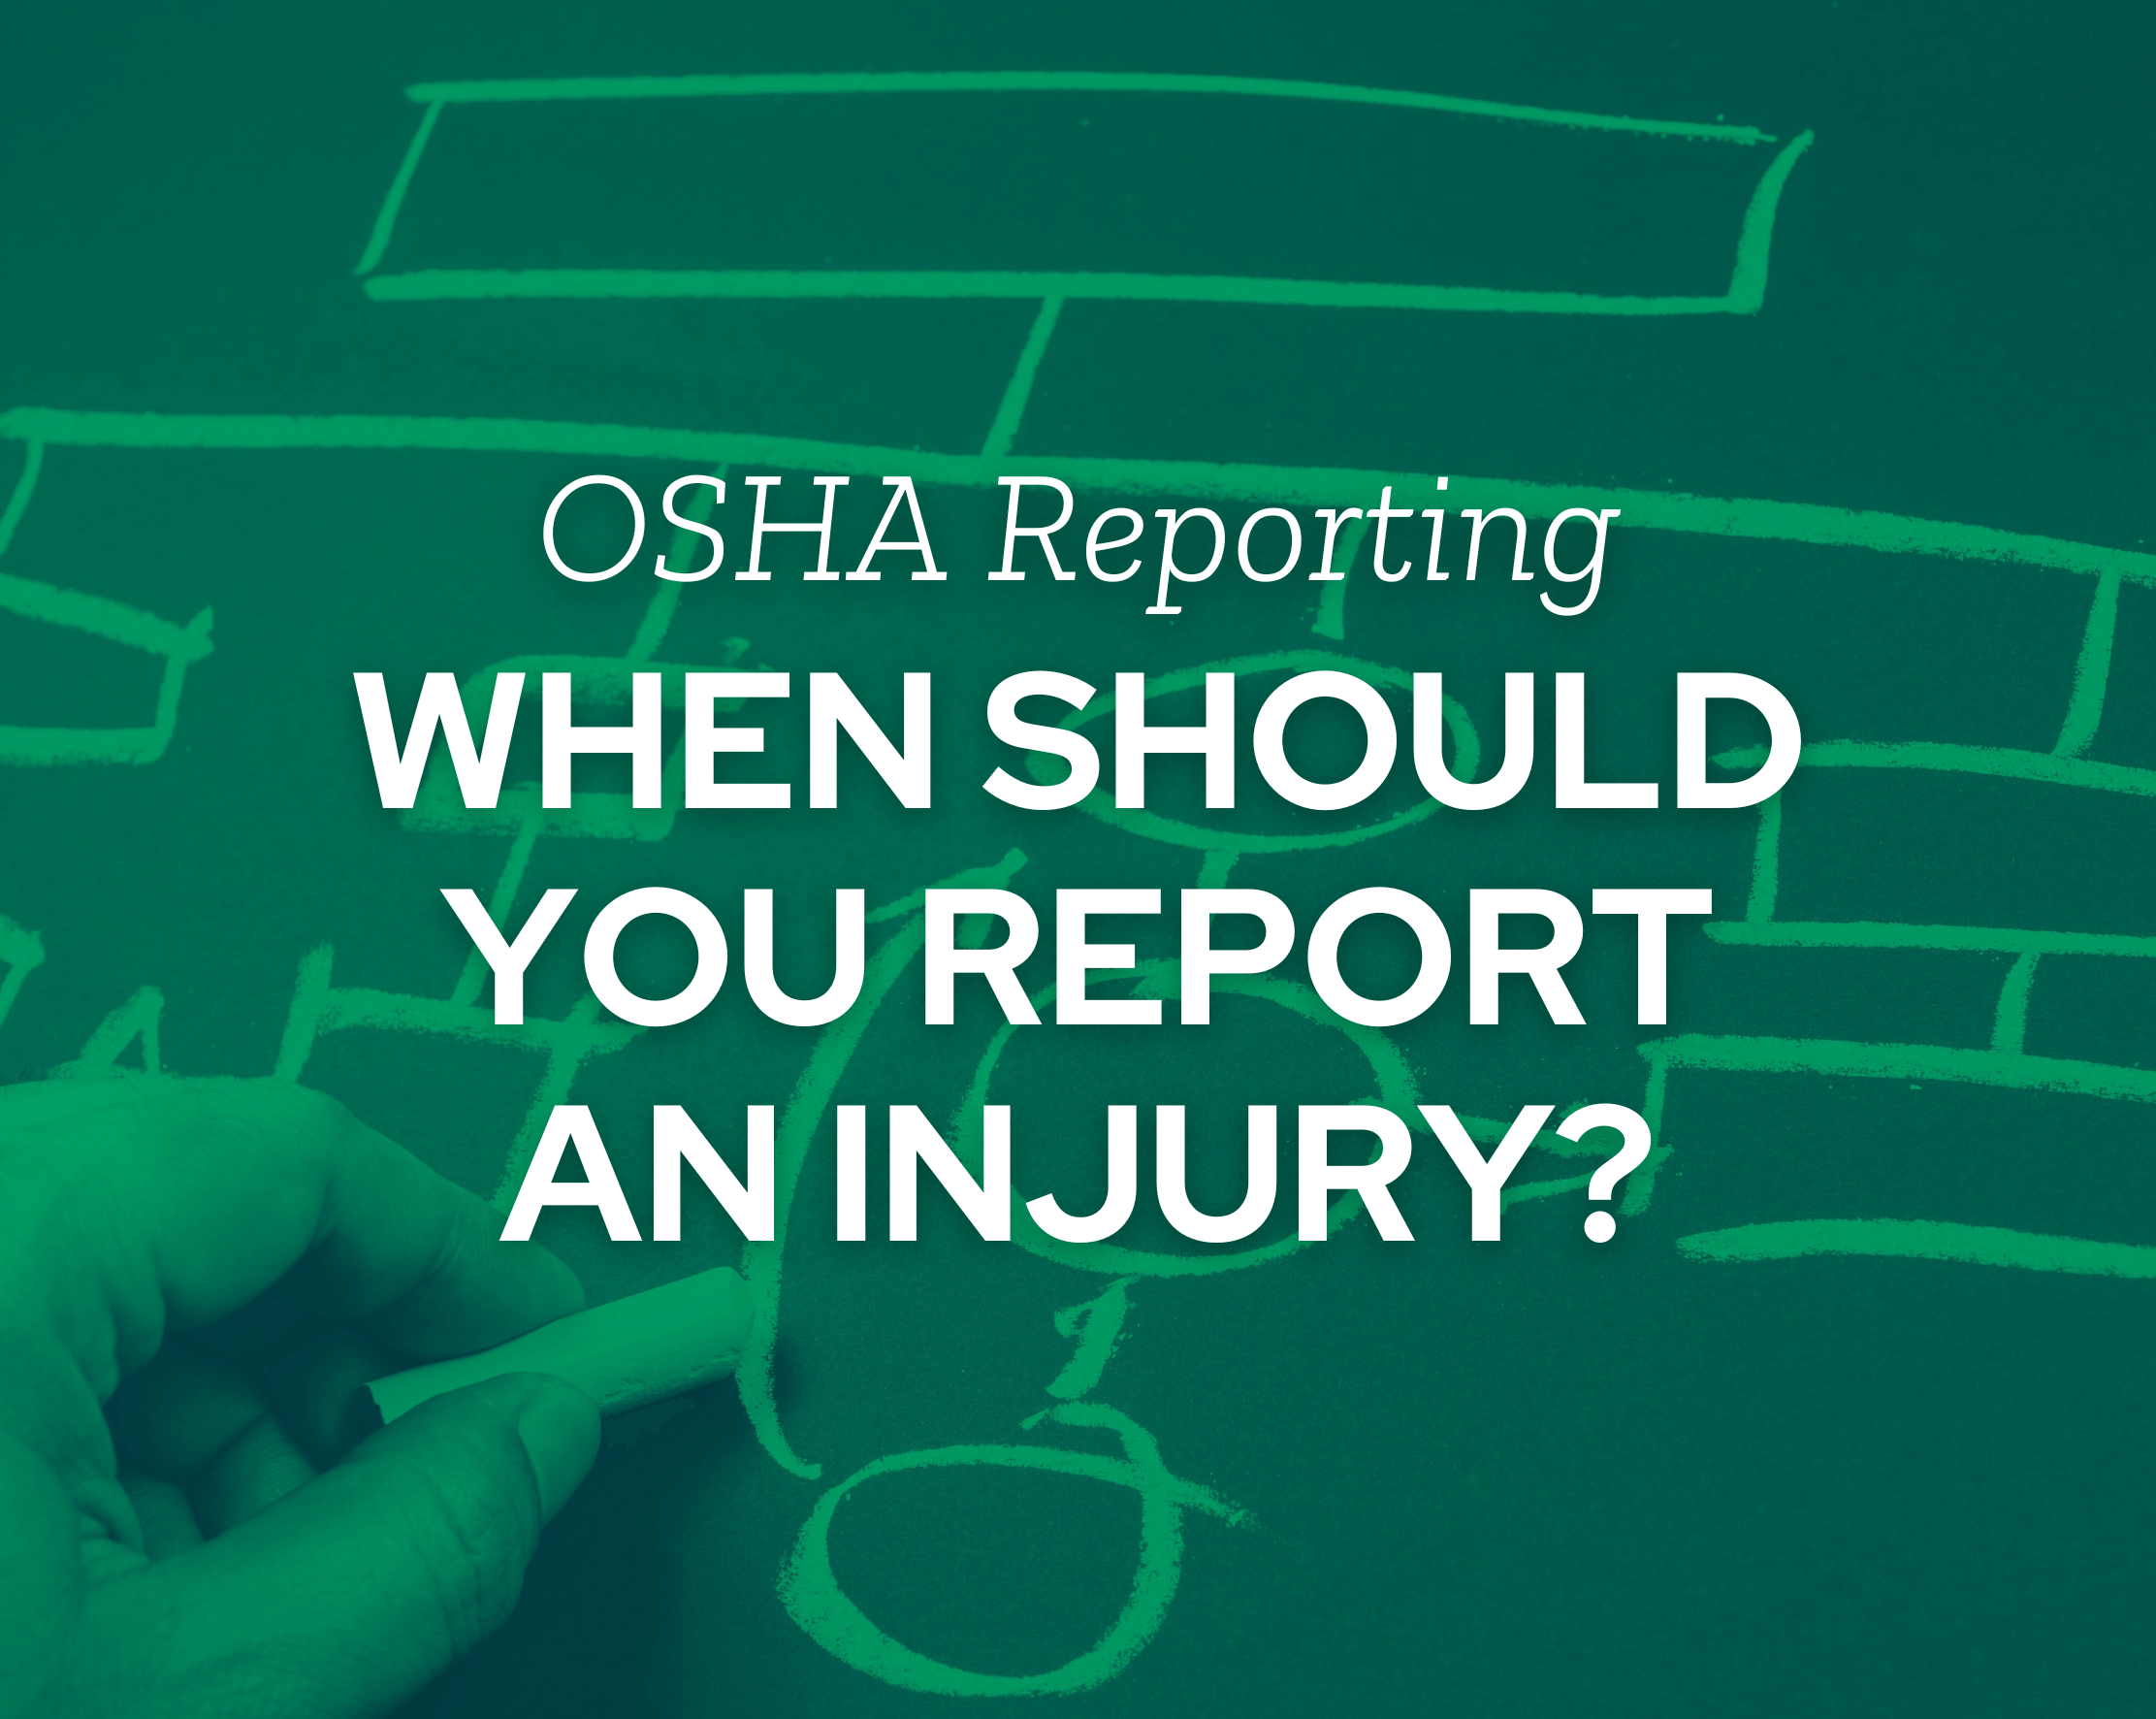 When Should You Report an Injury to OSHA? (Flowchart)